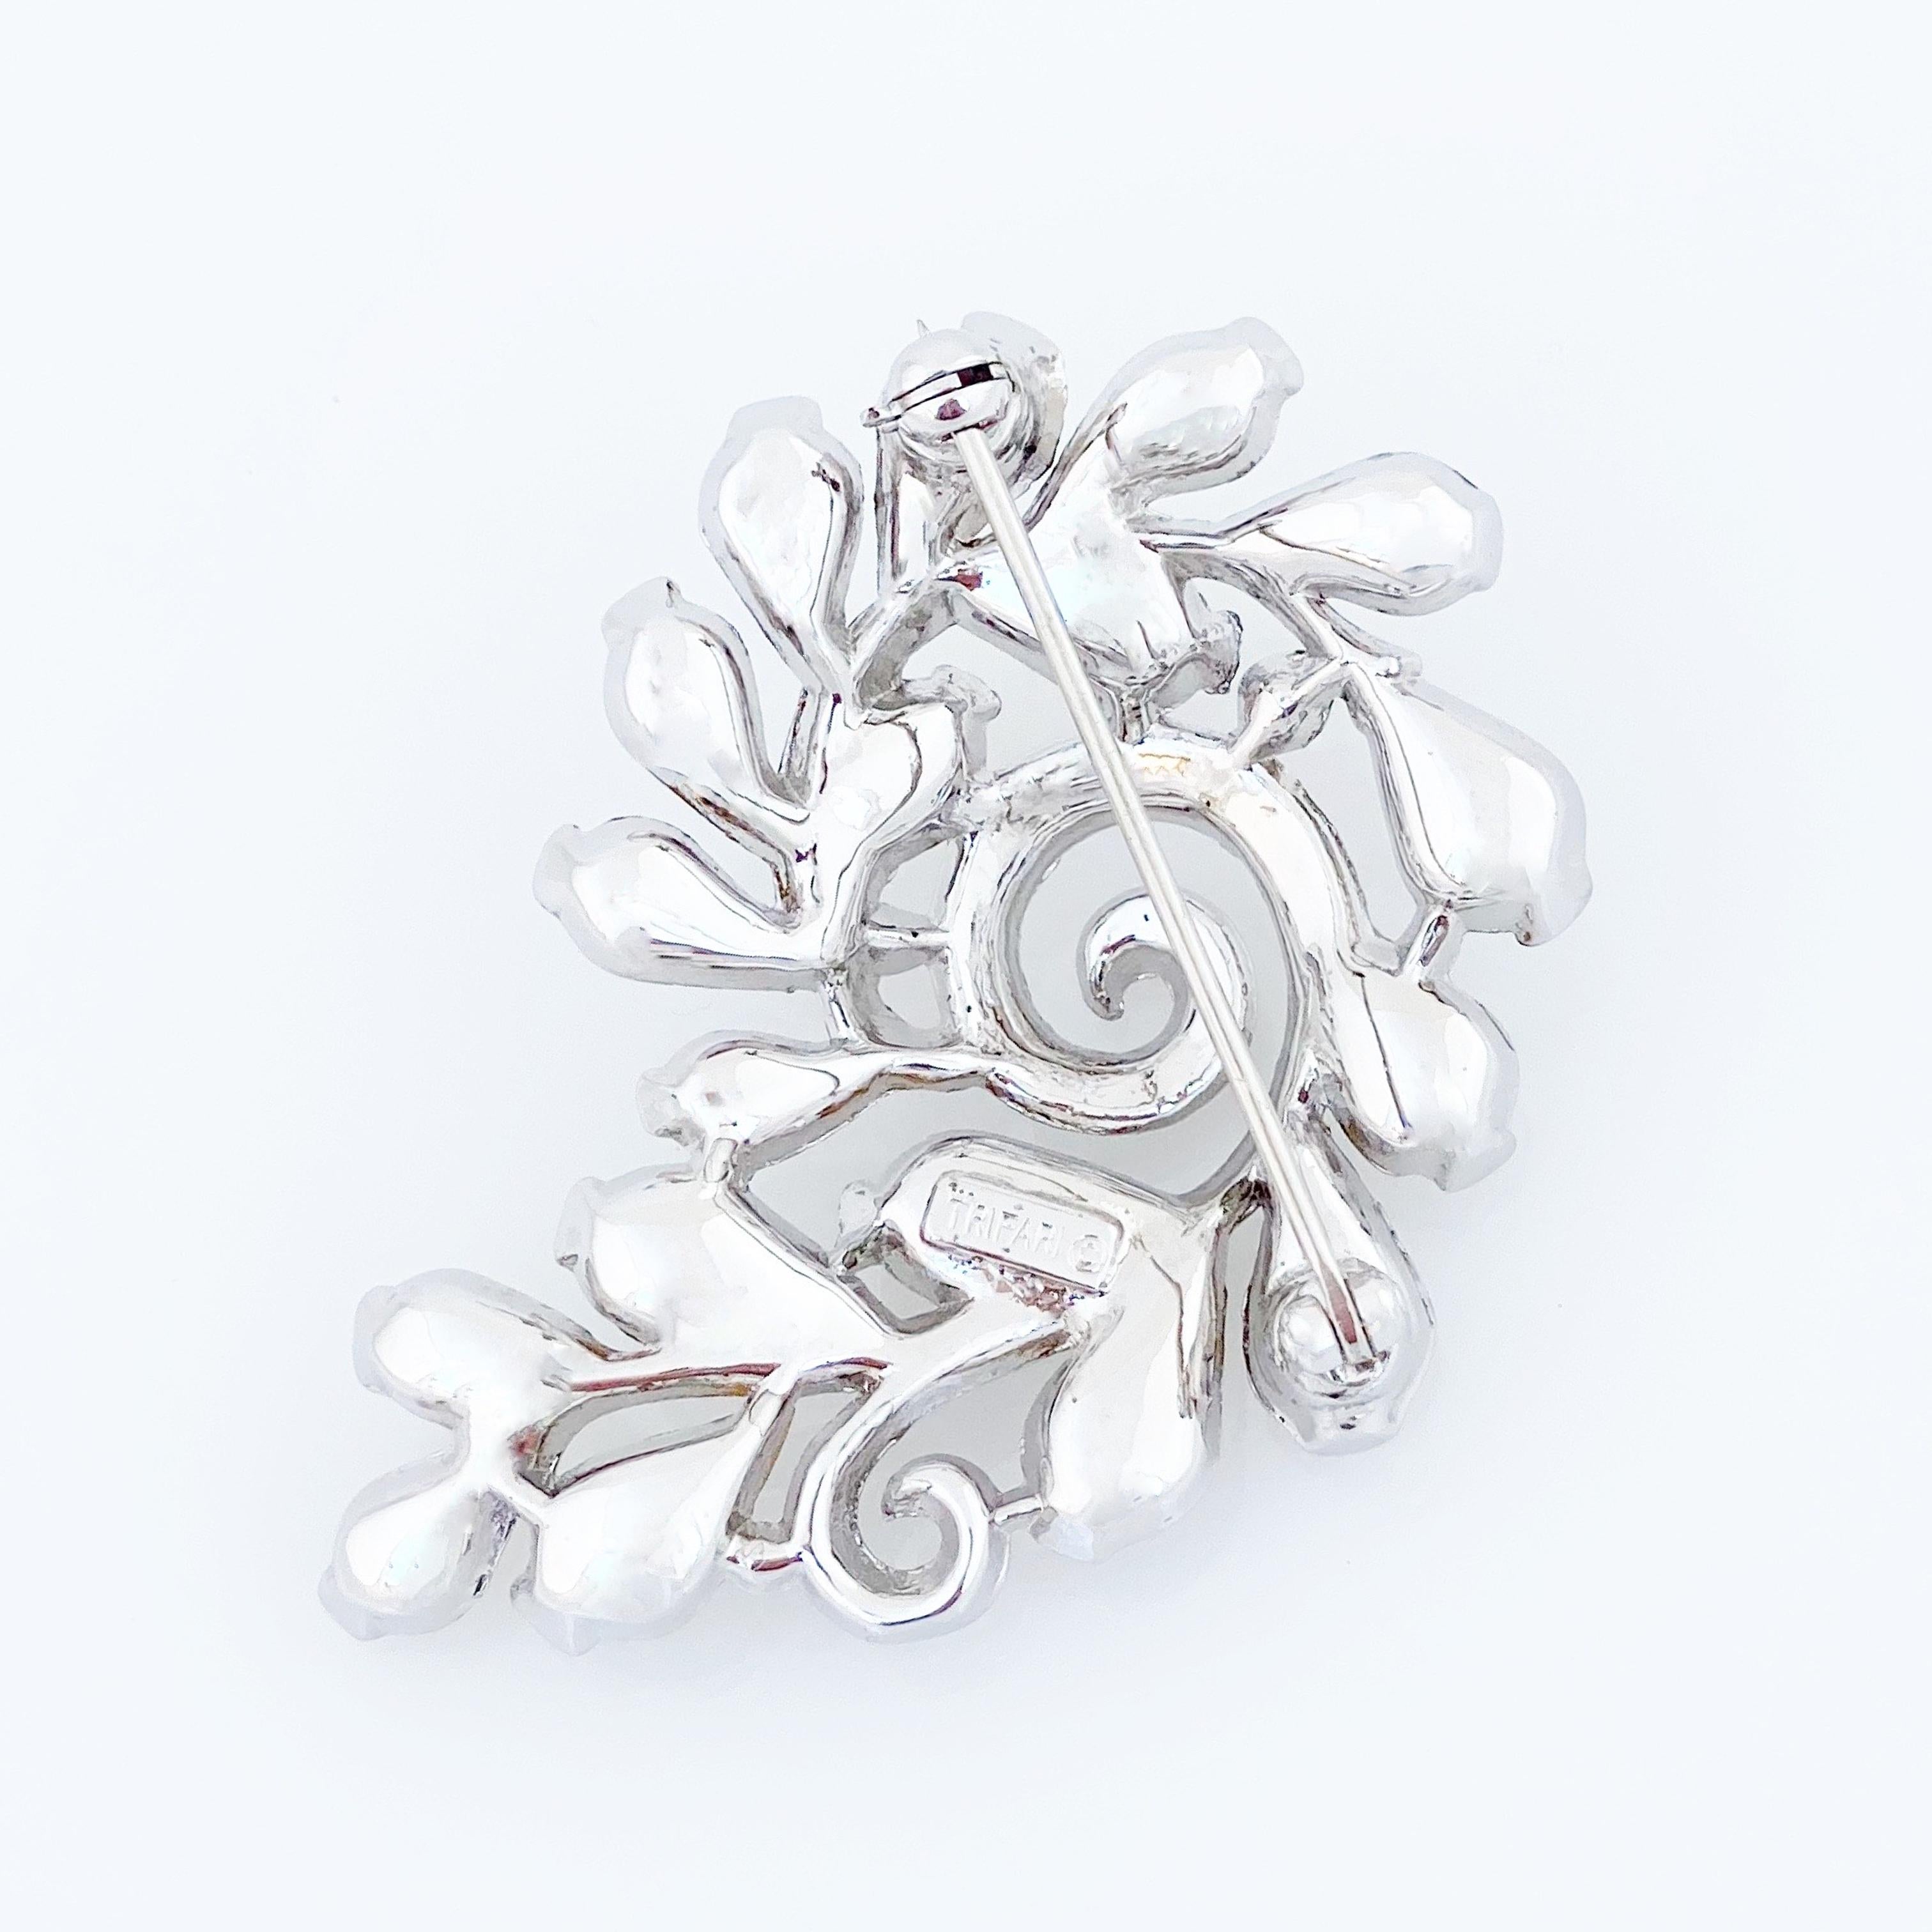 Platinum Trifarium Swirl Brooch With Teardrop Crystals By Crown Trifari, 1950s In Good Condition For Sale In McKinney, TX